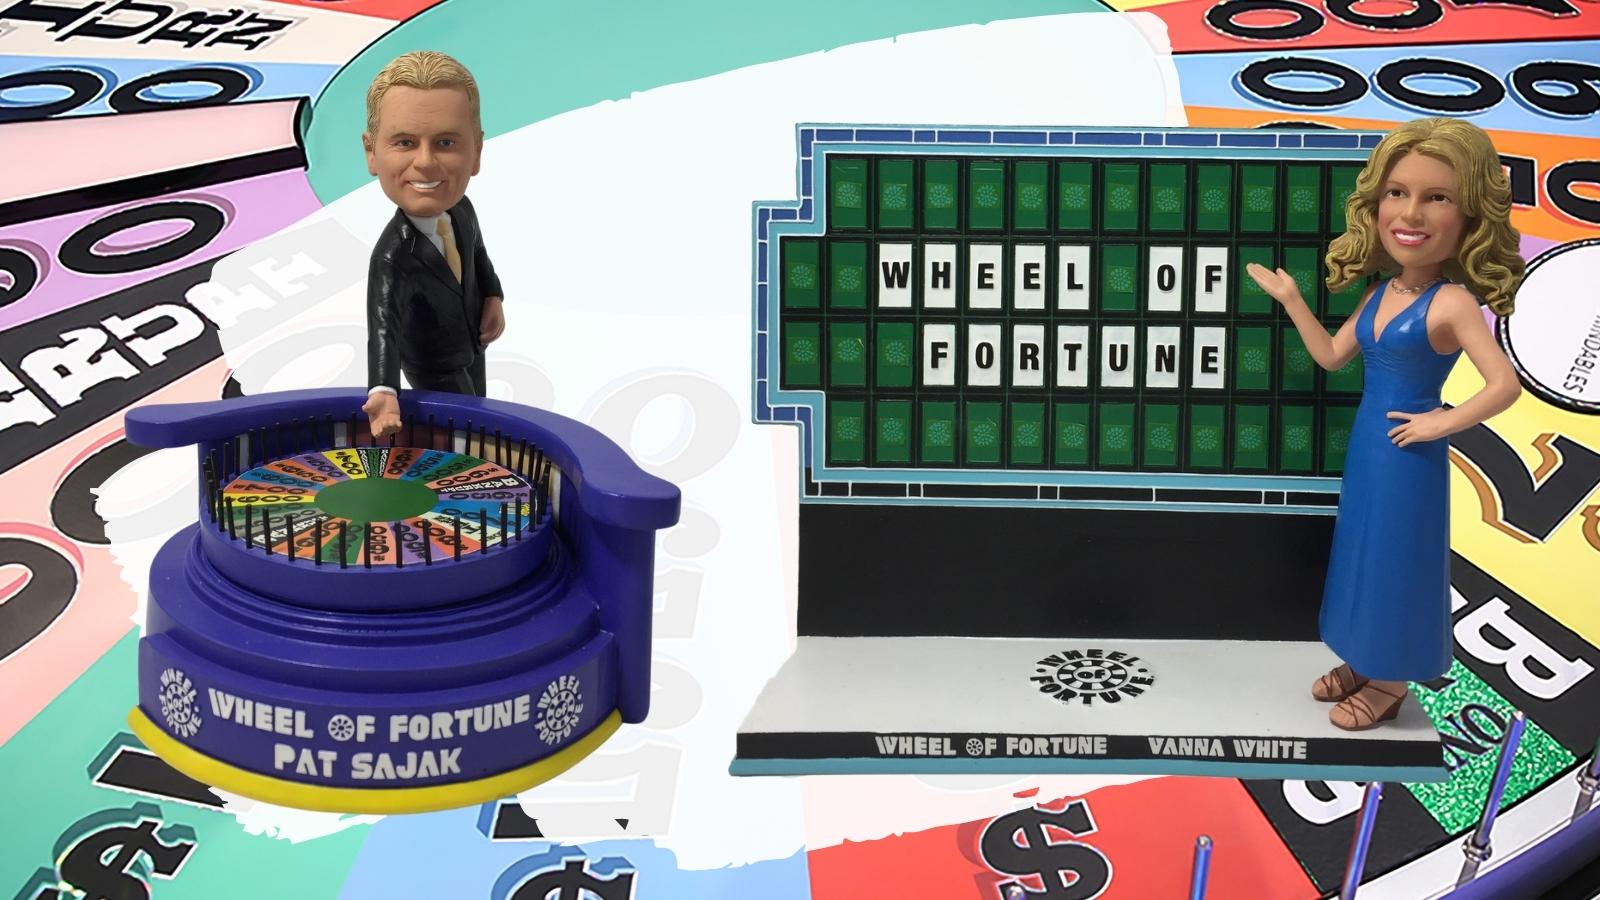 The National Bobblehead Hall of Fame and Museum has unveiled `Wheel of Fortune` Pat Sajak and Vanna White bobbleheads. (Images courtesy of the National Bobblehead Hall of Fame and Museum)